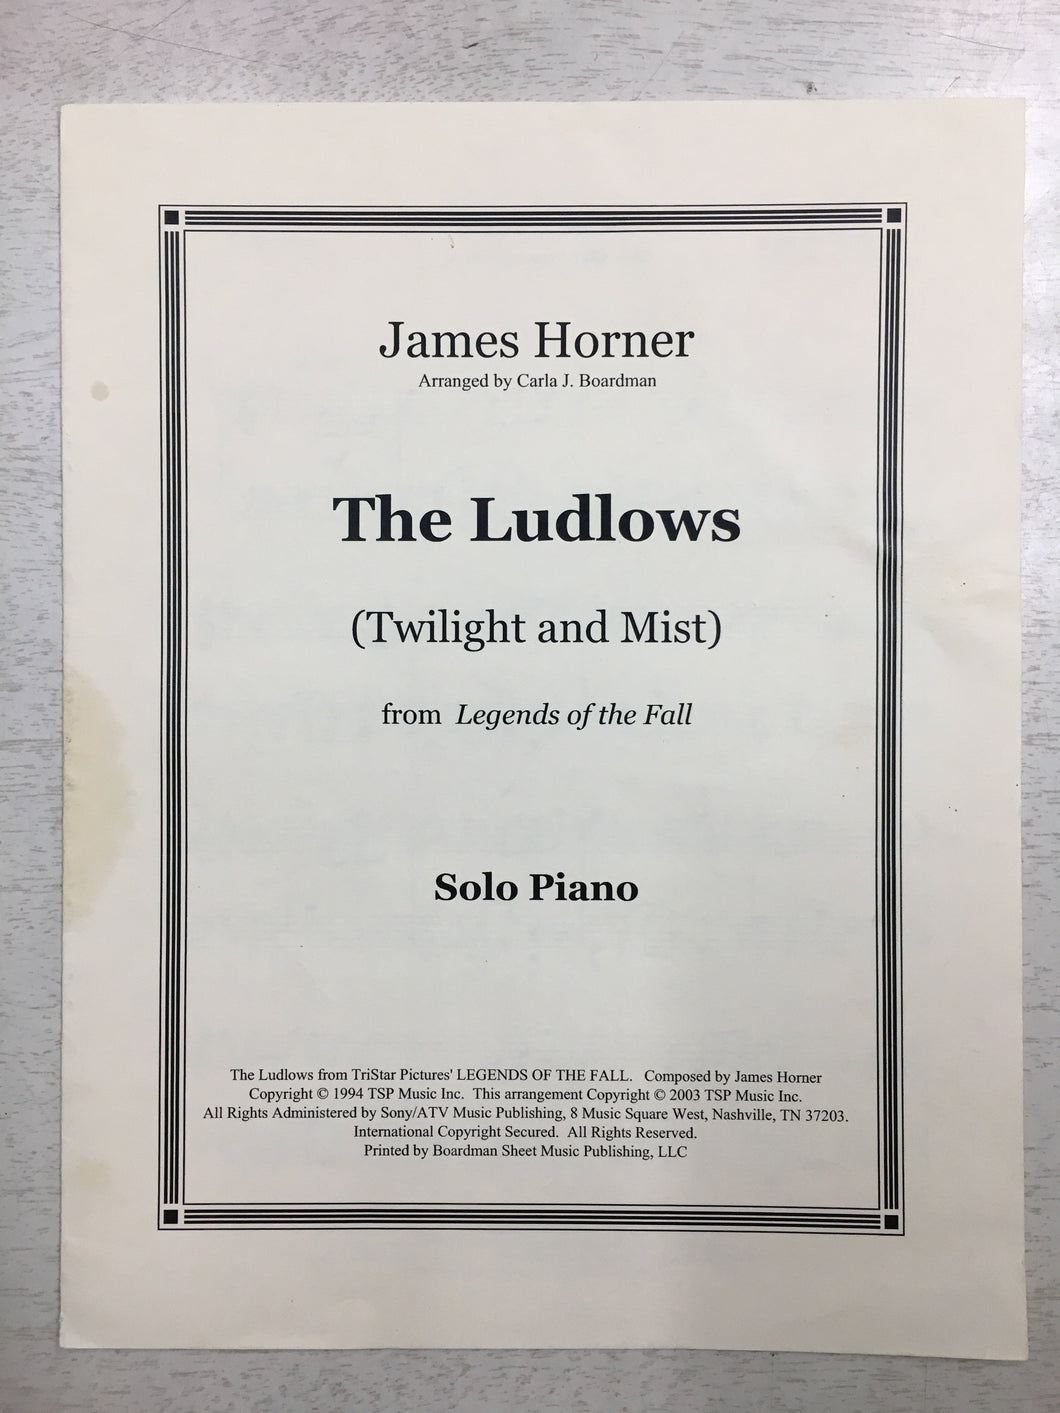 The Ludlows, James Horner